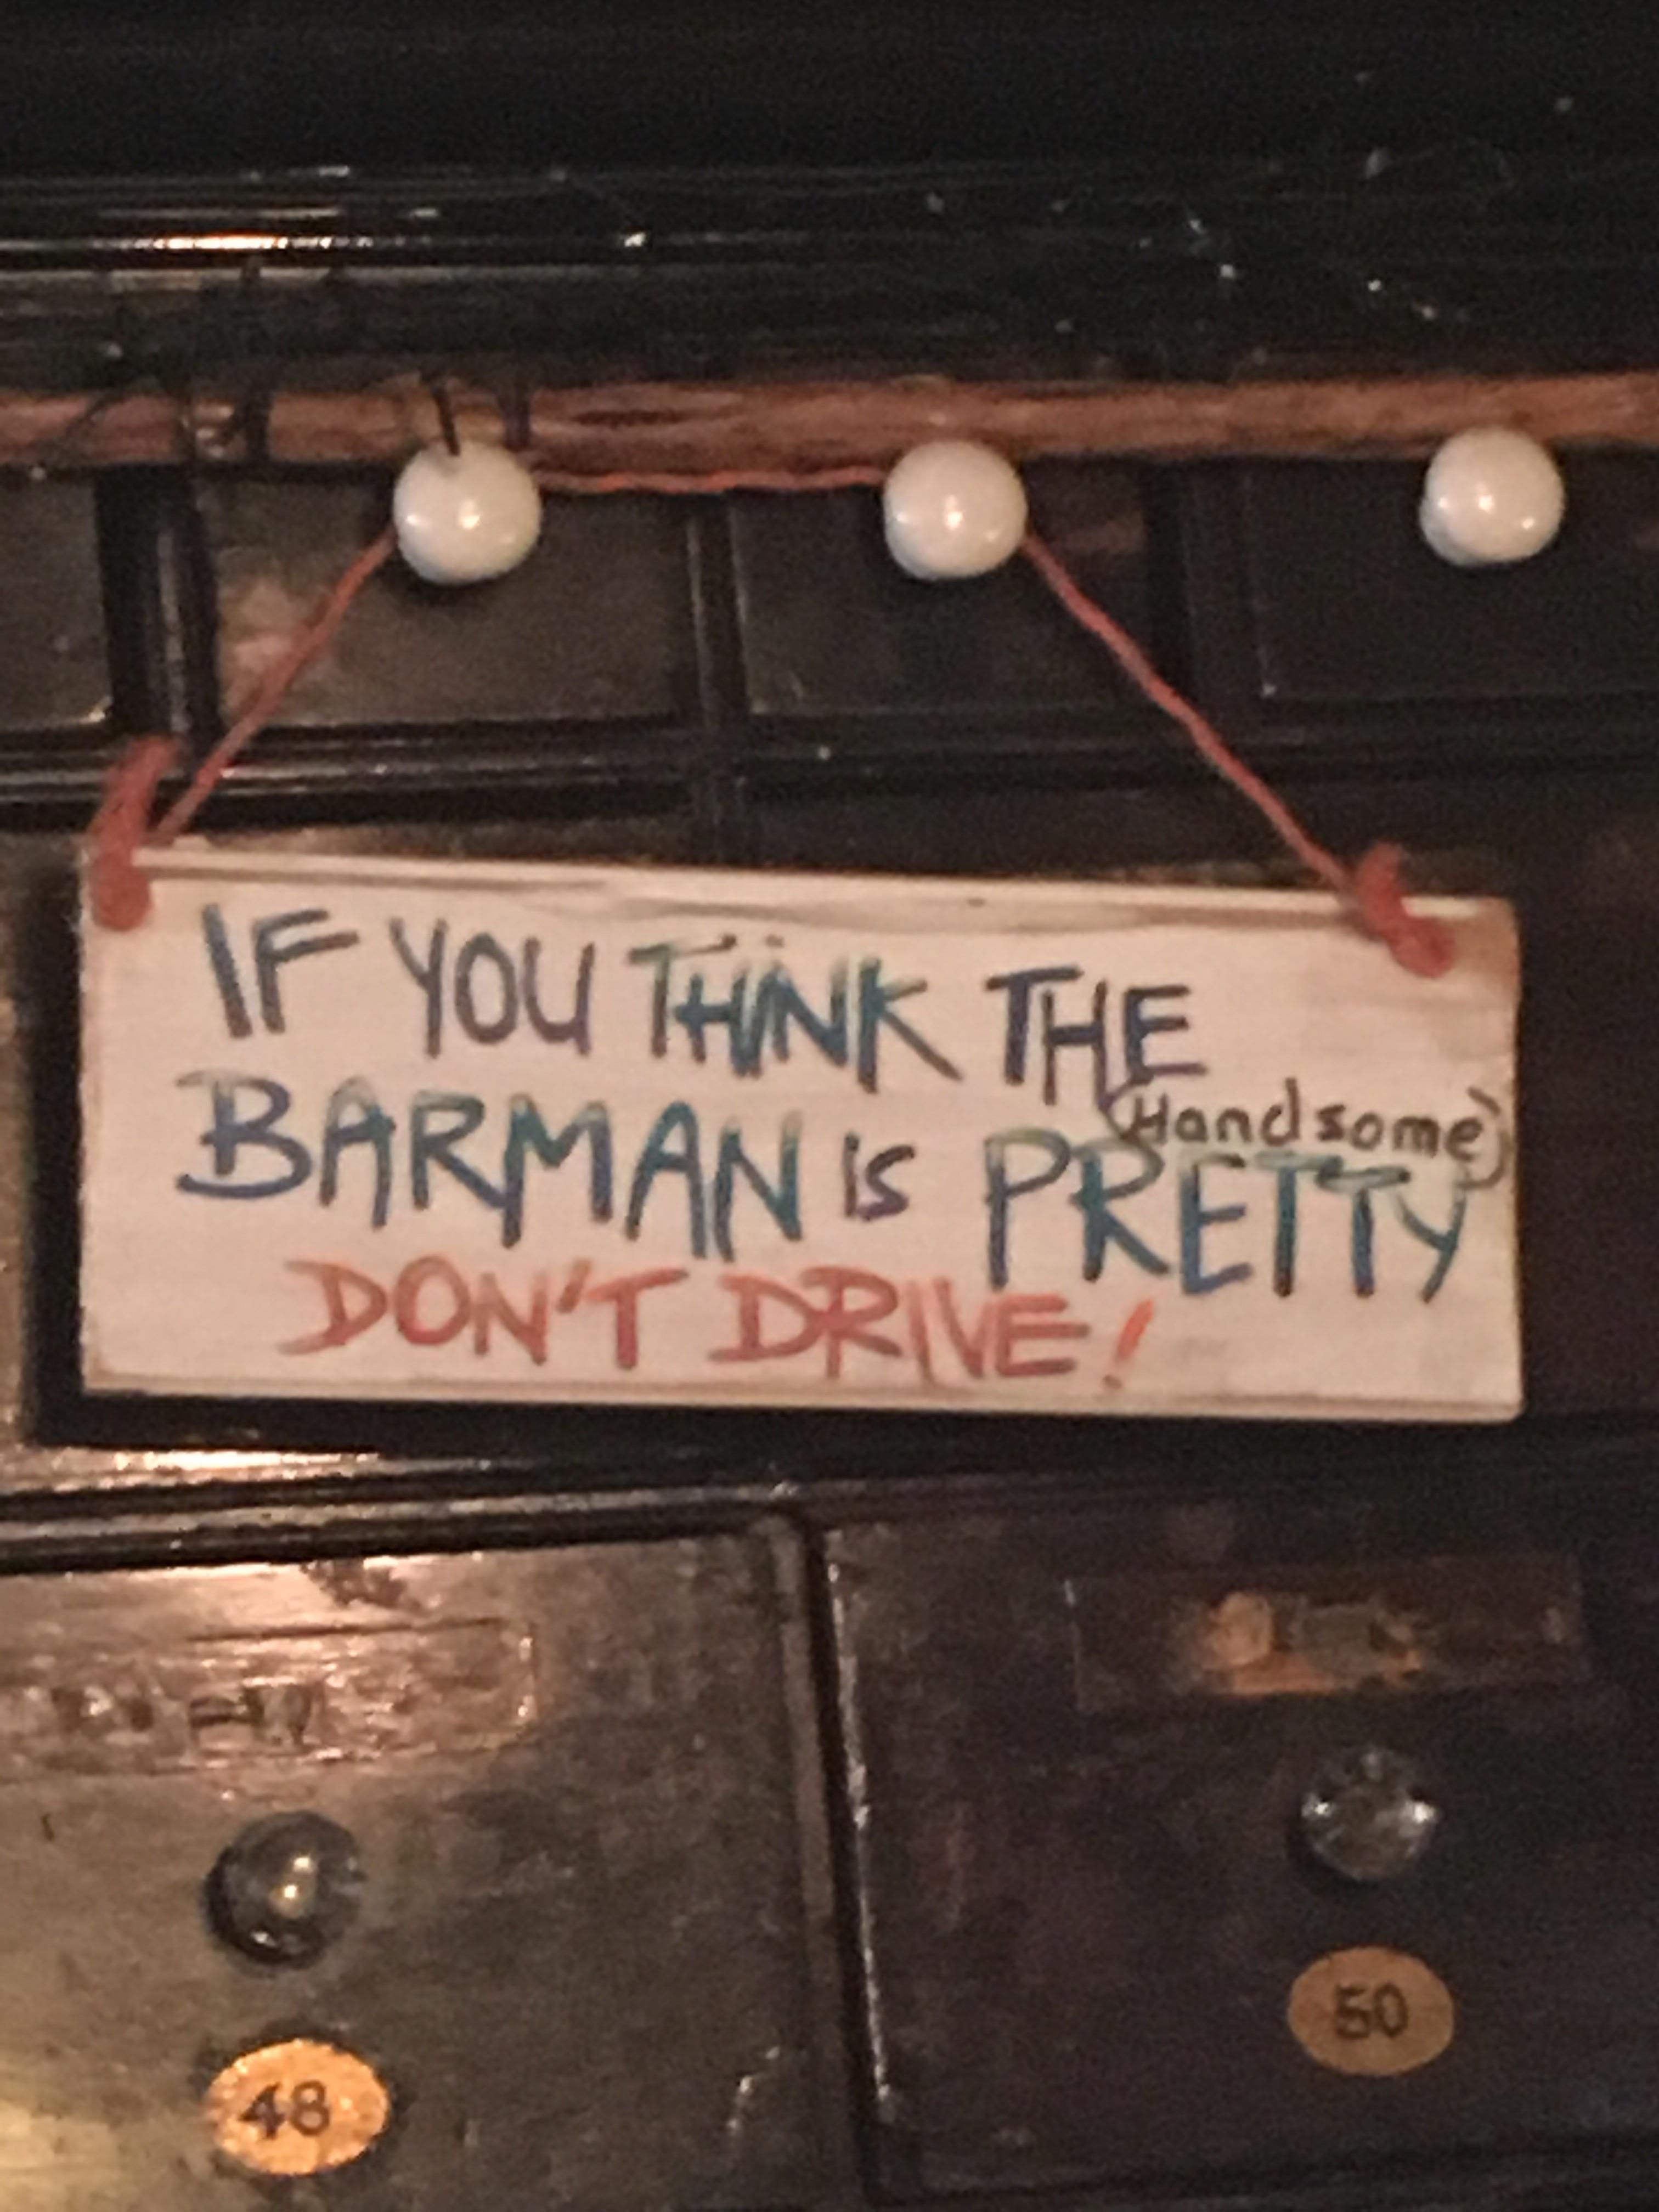 This sign in my local pub